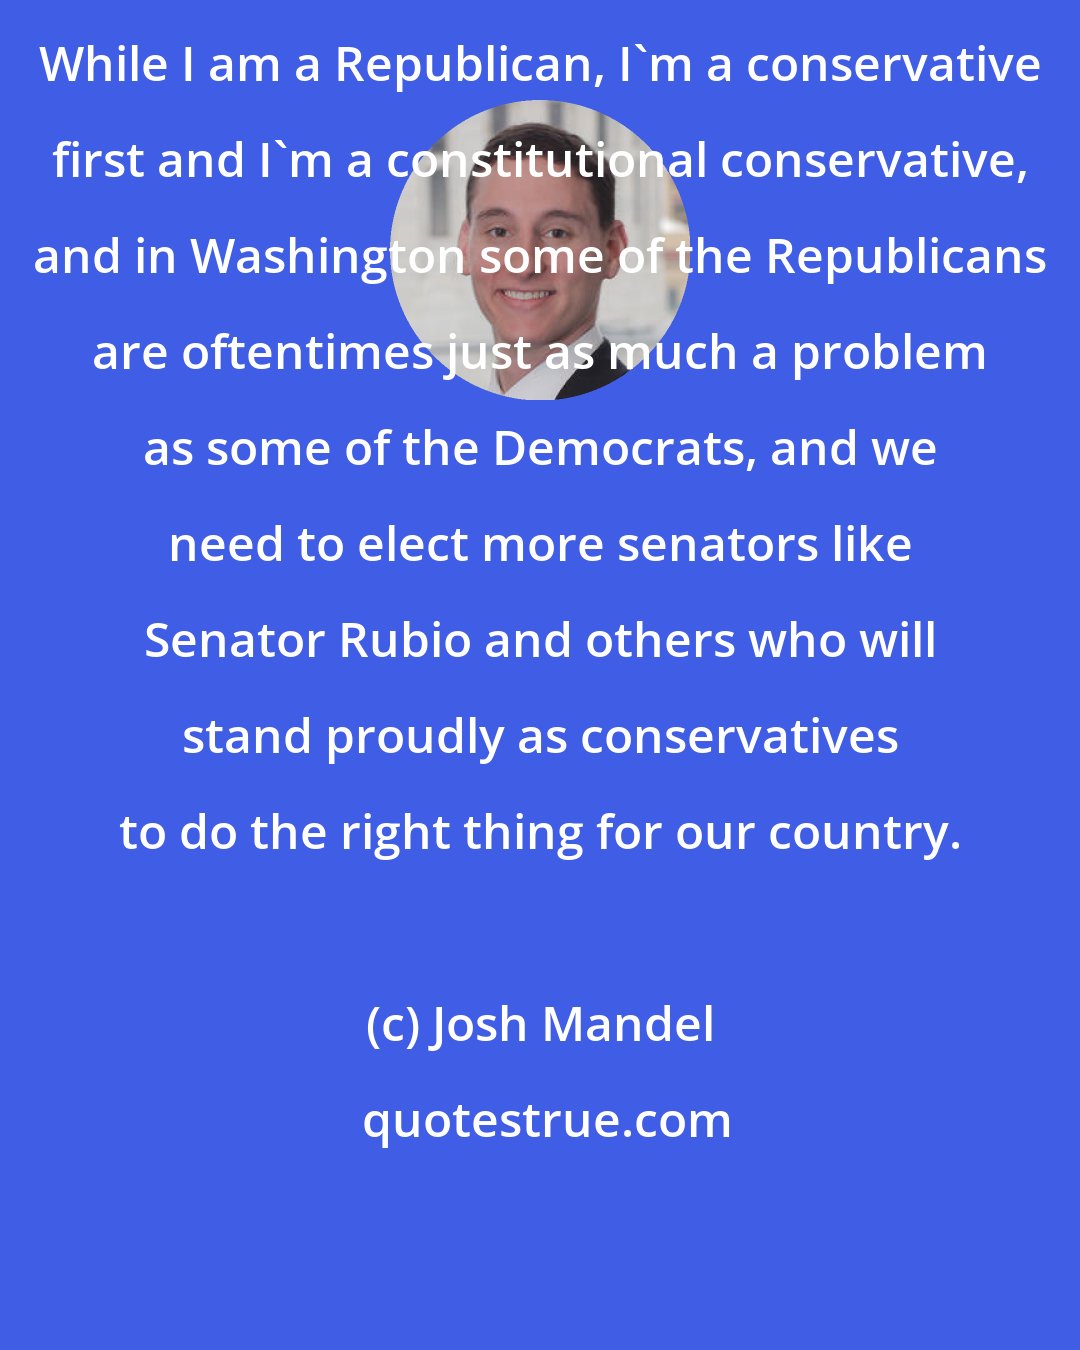 Josh Mandel: While I am a Republican, I'm a conservative first and I'm a constitutional conservative, and in Washington some of the Republicans are oftentimes just as much a problem as some of the Democrats, and we need to elect more senators like Senator Rubio and others who will stand proudly as conservatives to do the right thing for our country.